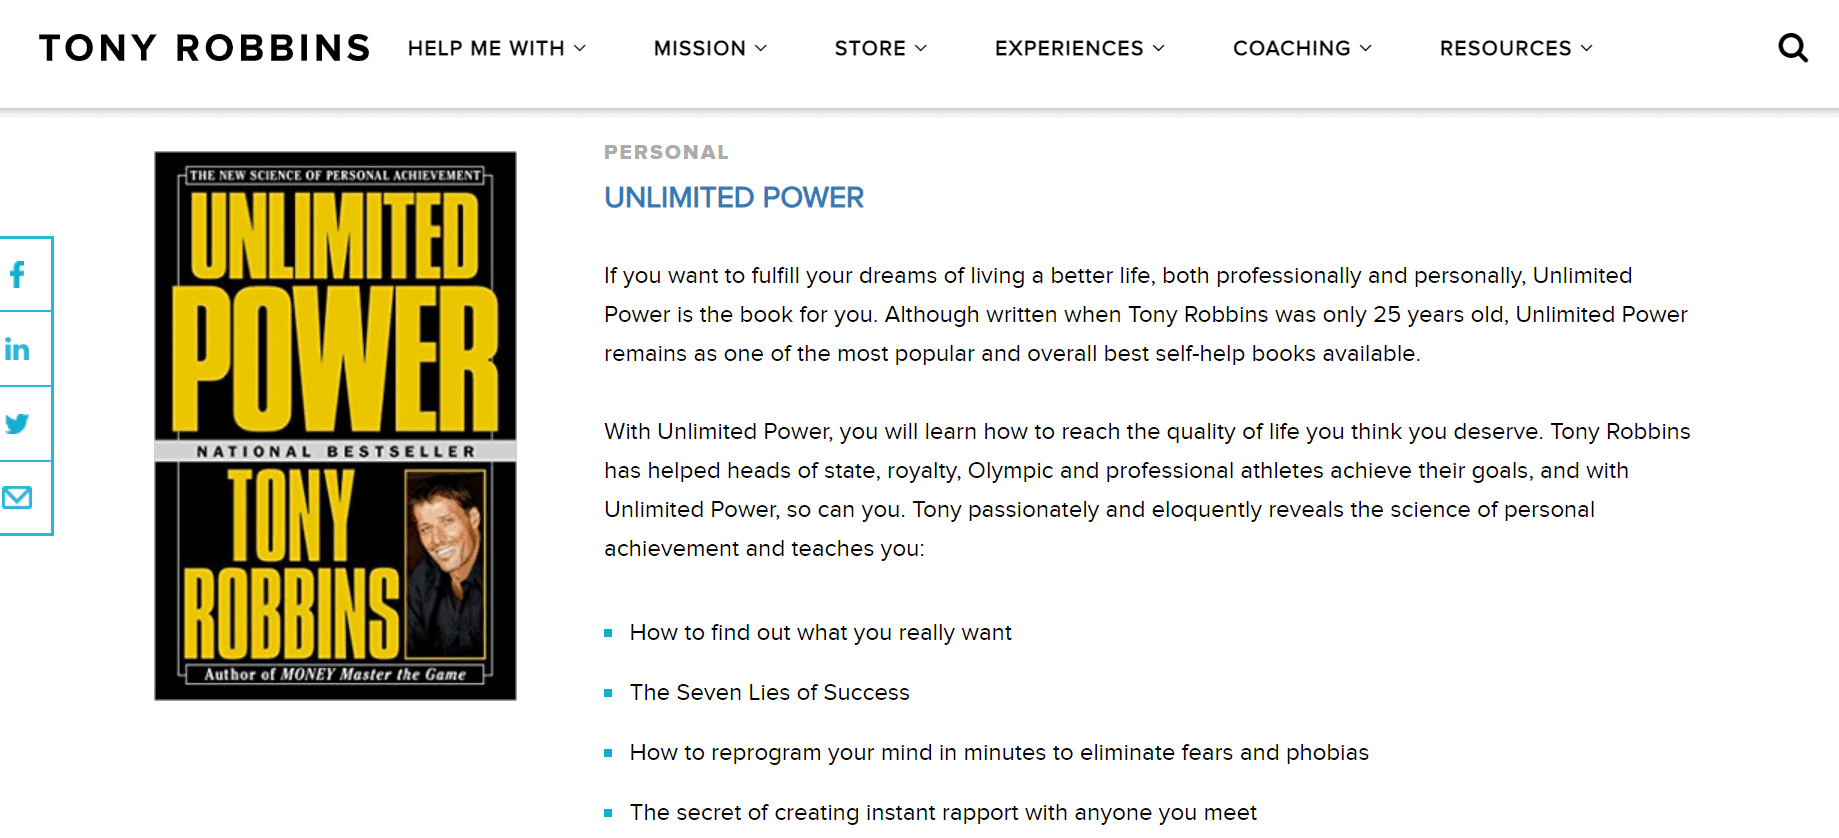 The Unlimited Power - Money Master the Game Book By Tony Robbins 